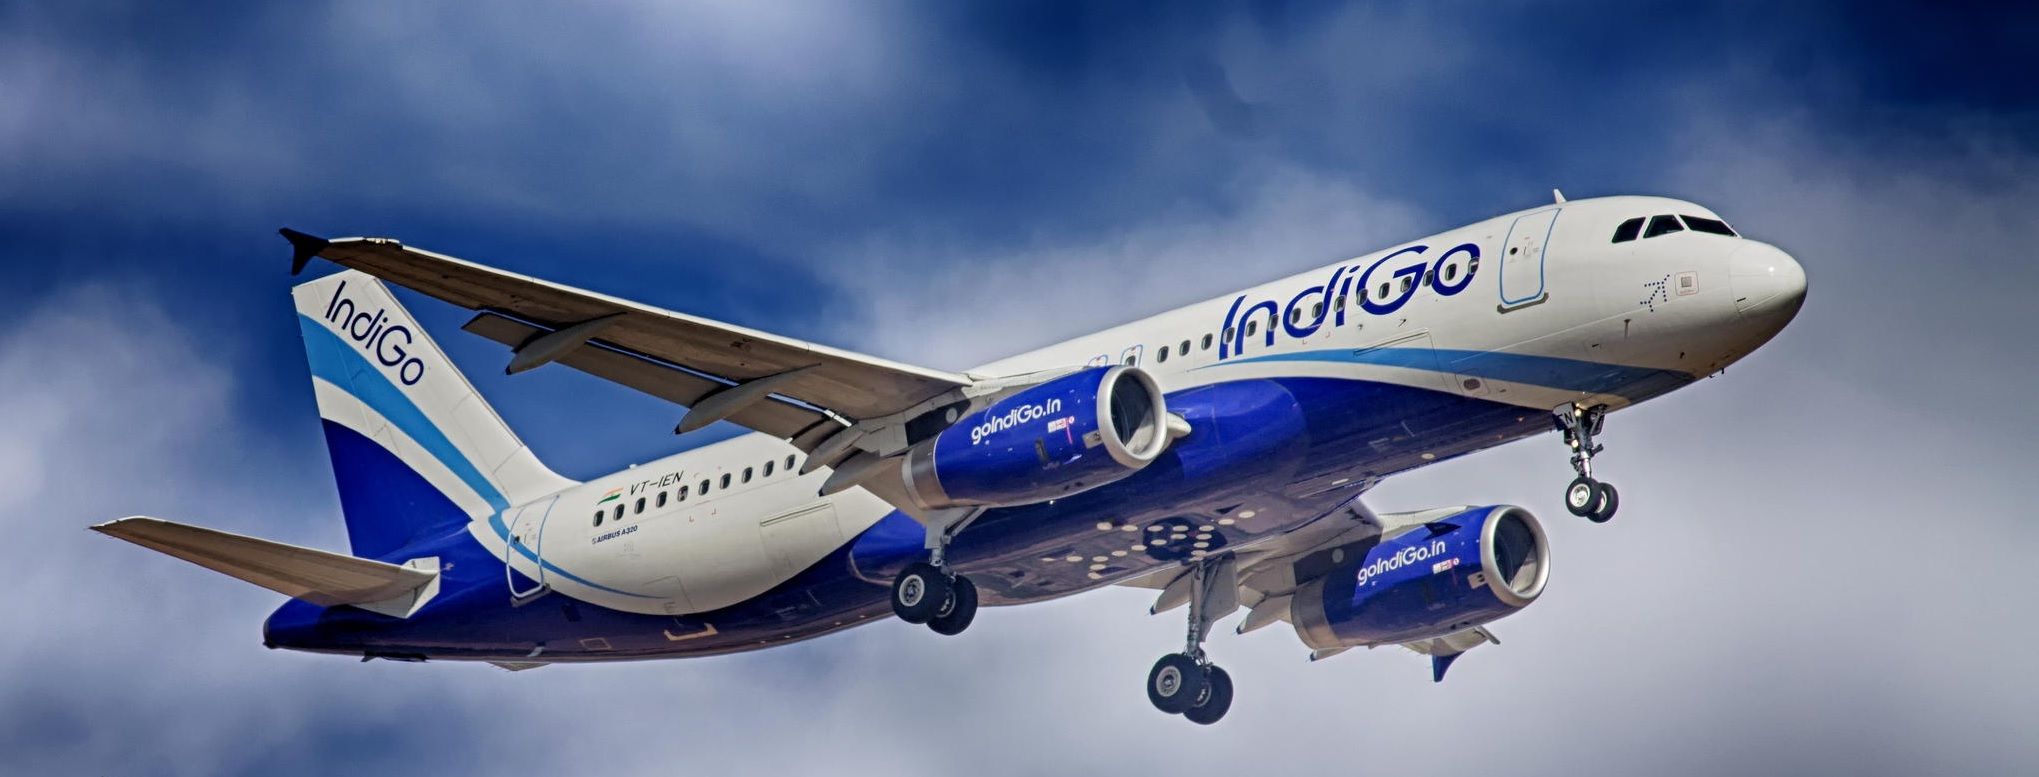 Indigo panning to expand fleet with arrival of 20 new A321 Neos